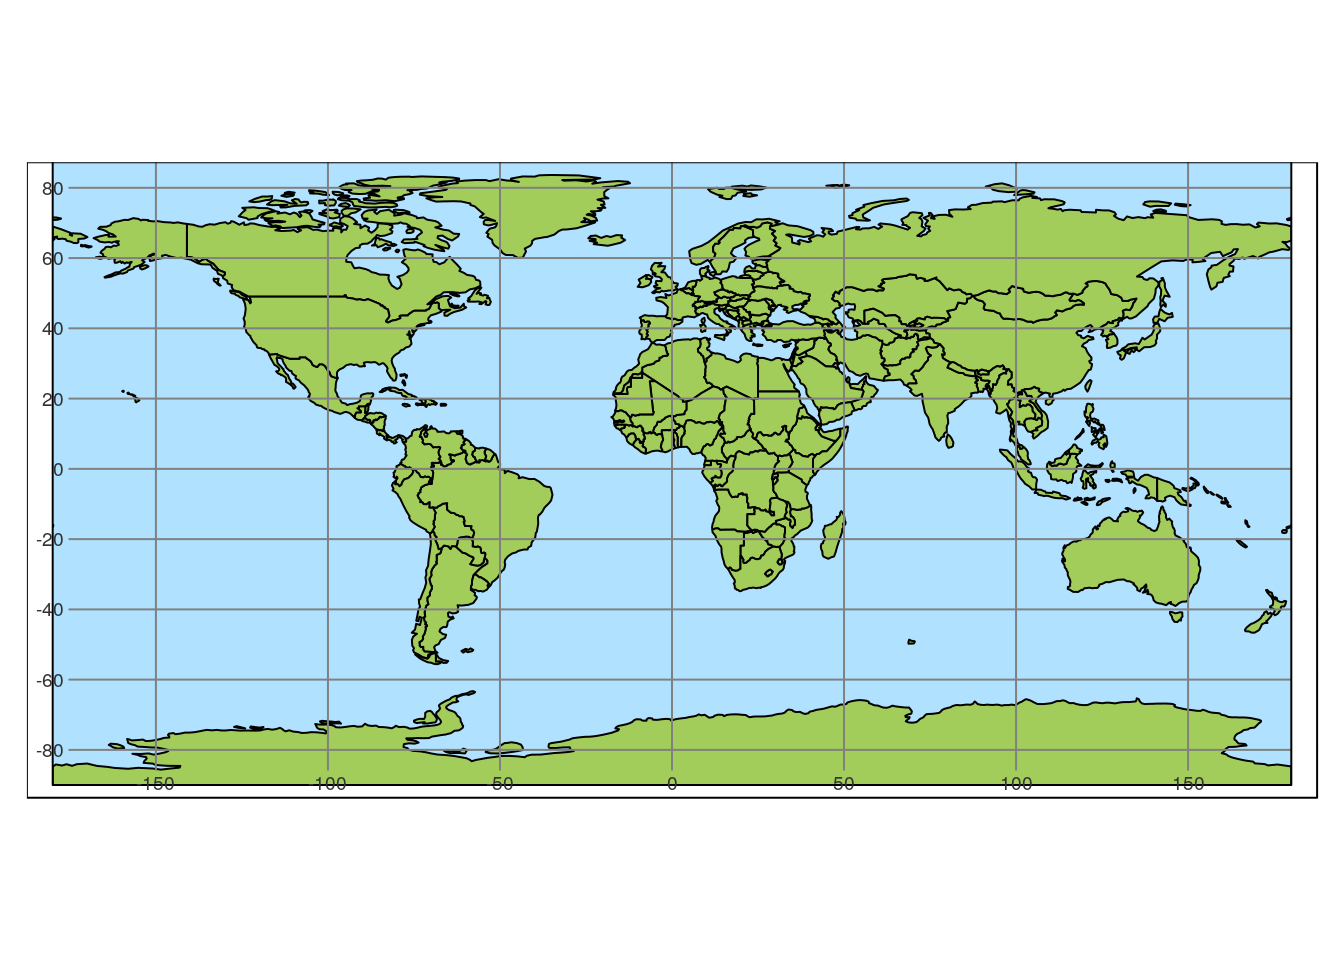 Natural earth countries layer unprojected (EPSG:4326) 